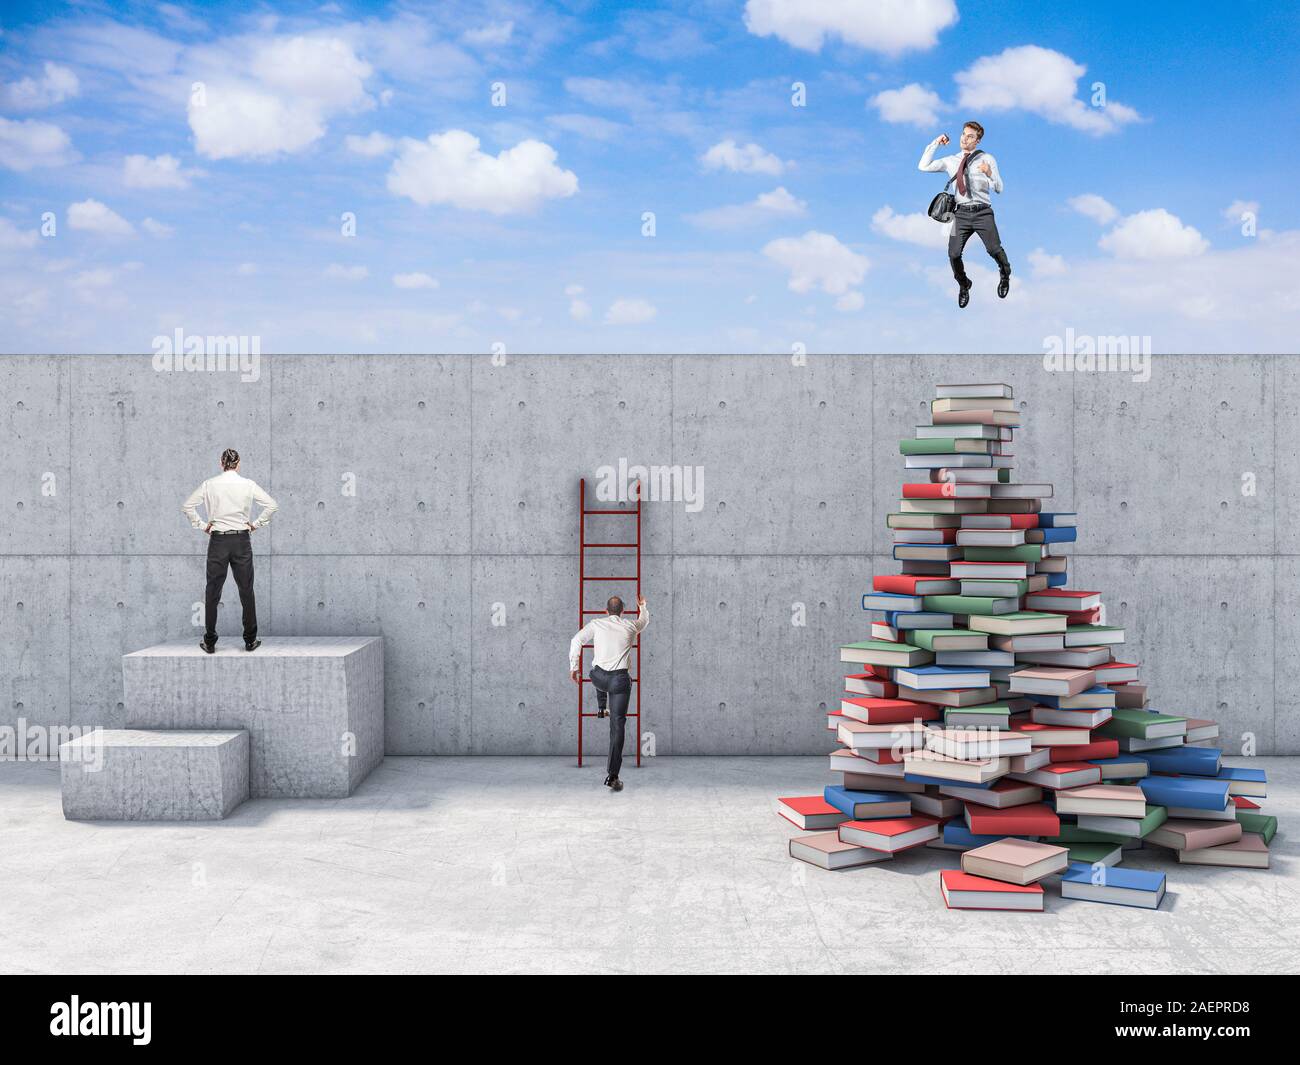 business people try to find a solution to pass a wall that hinders them. The man who studied is successful. Knowledge and problem solving concept. Stock Photo